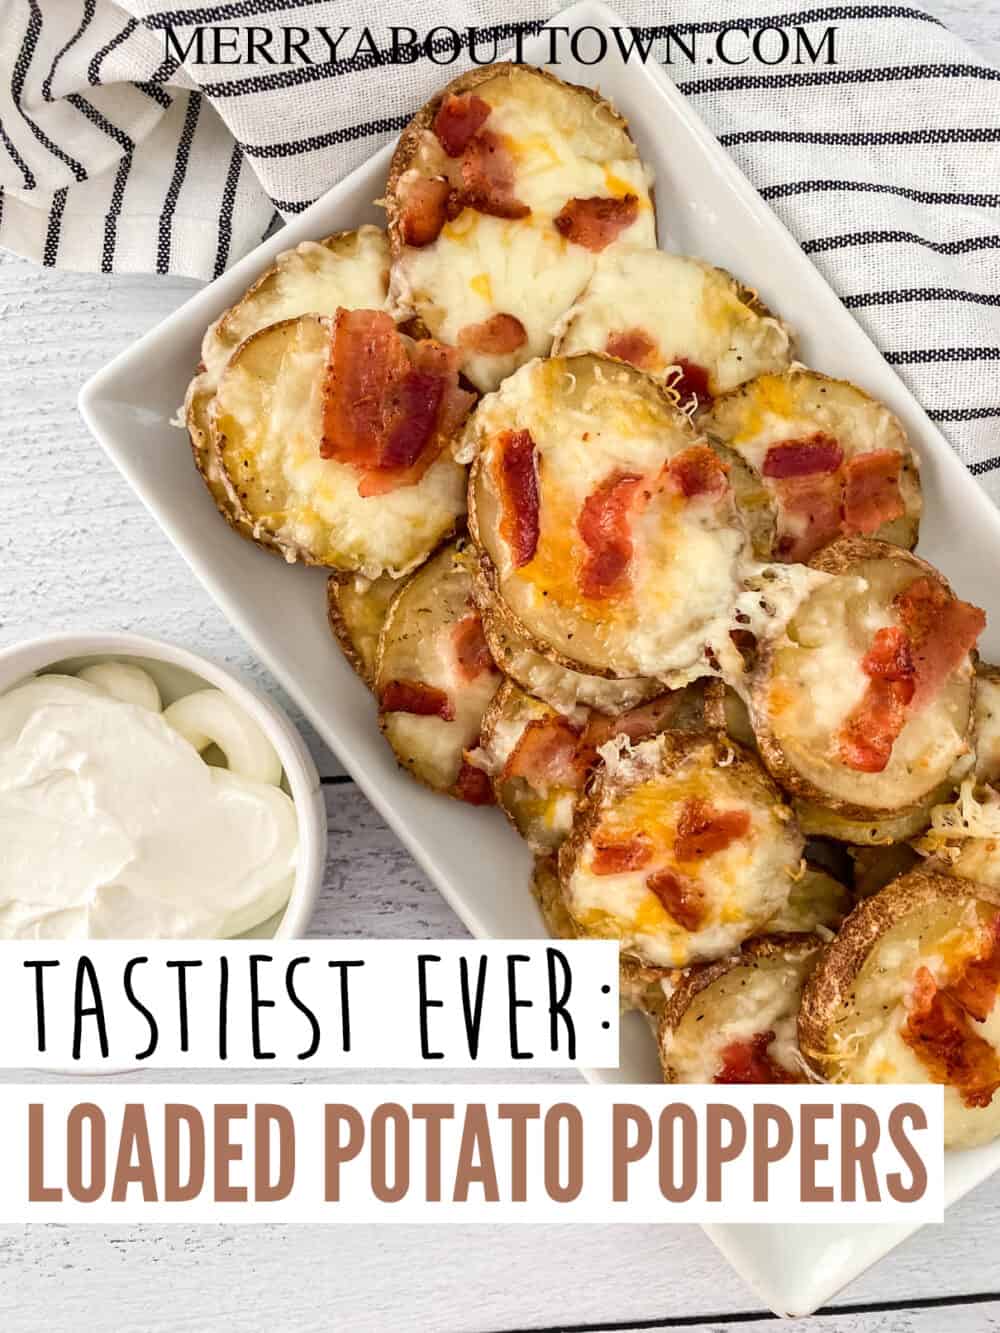 We can never say no to a good appetizer - especially if it involves potatoes! My Loaded Potato Poppers contain all sorts of yummy toppings like bacon, ranch seasoning and mozzarella cheese.